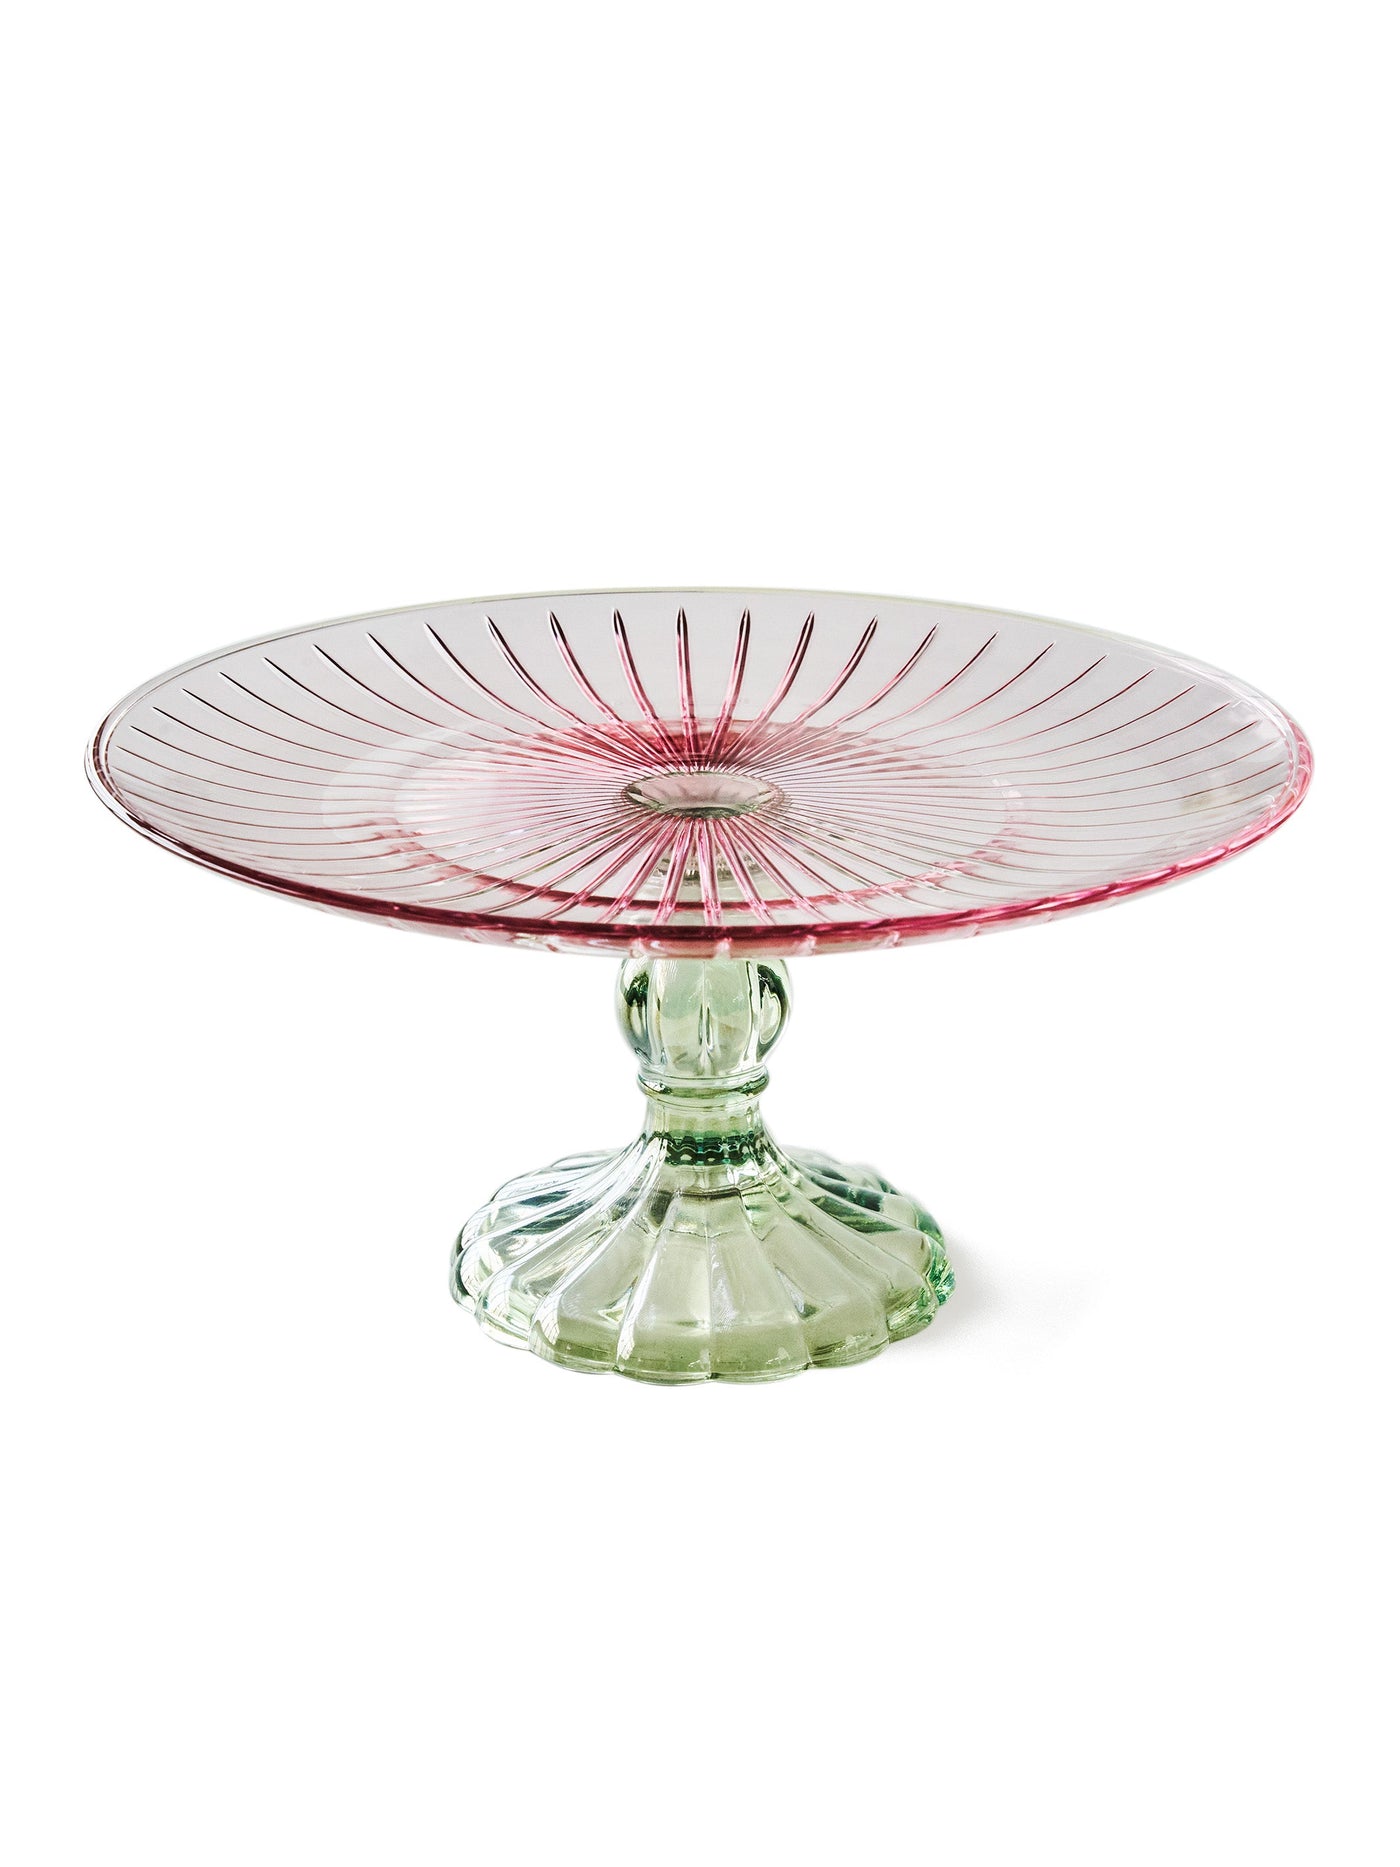 Prestige Cake Stand Pink/Green by Creart